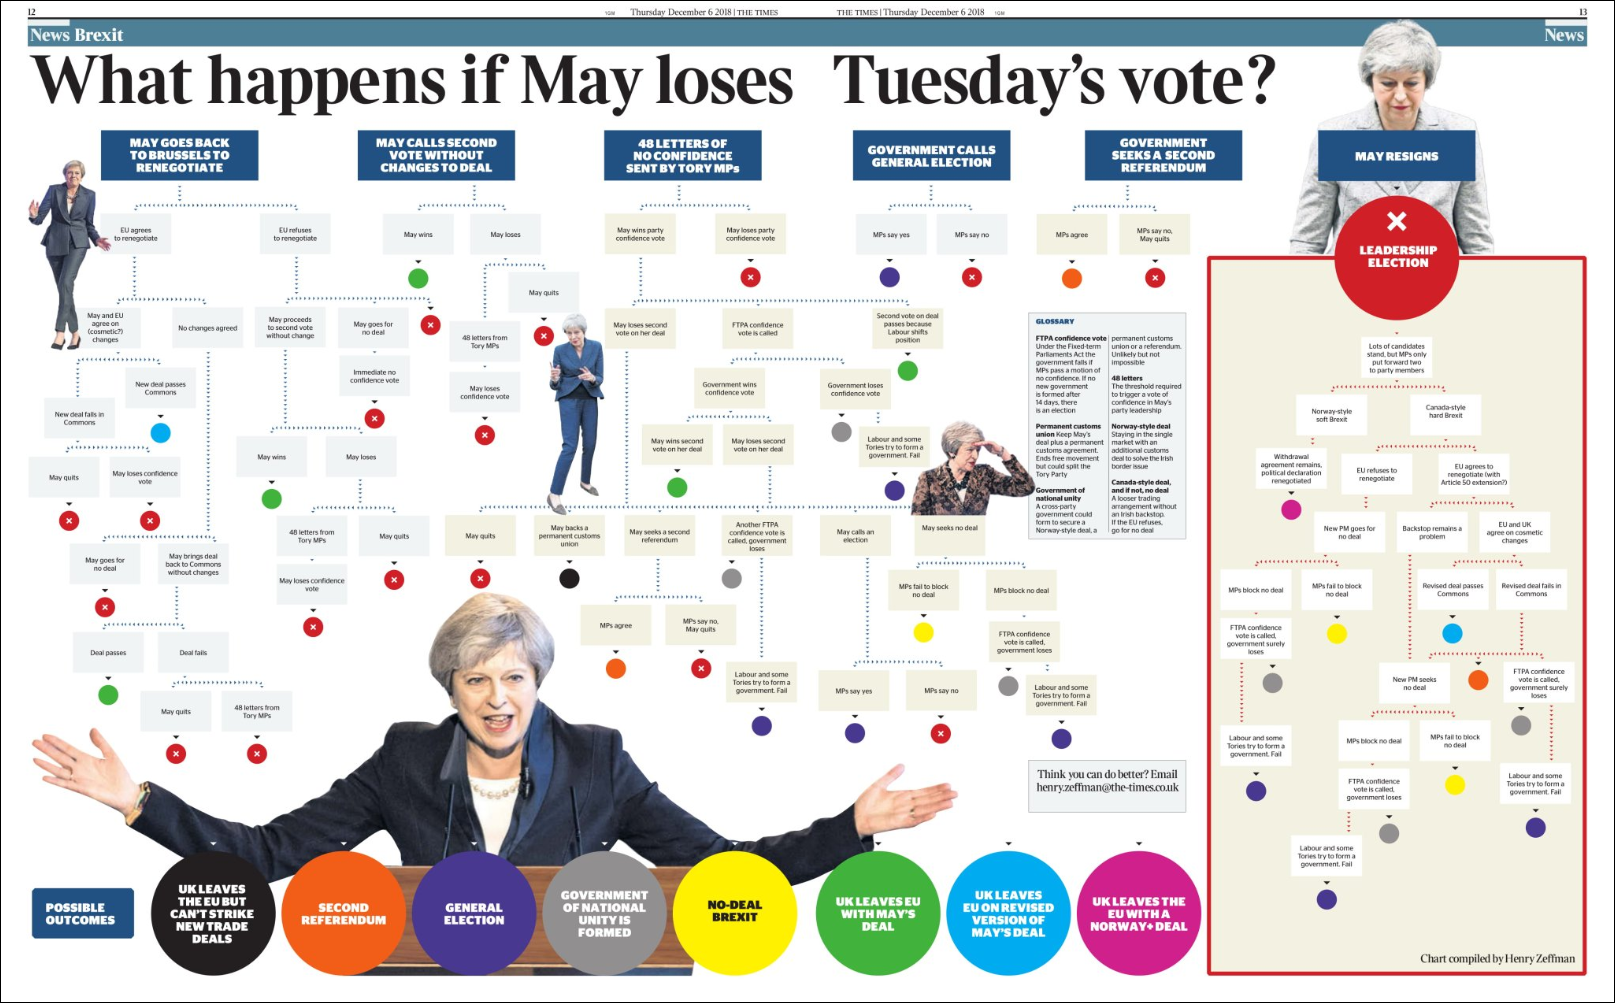 What happens if Theresa May loses the meaningful vote in parliament next week?